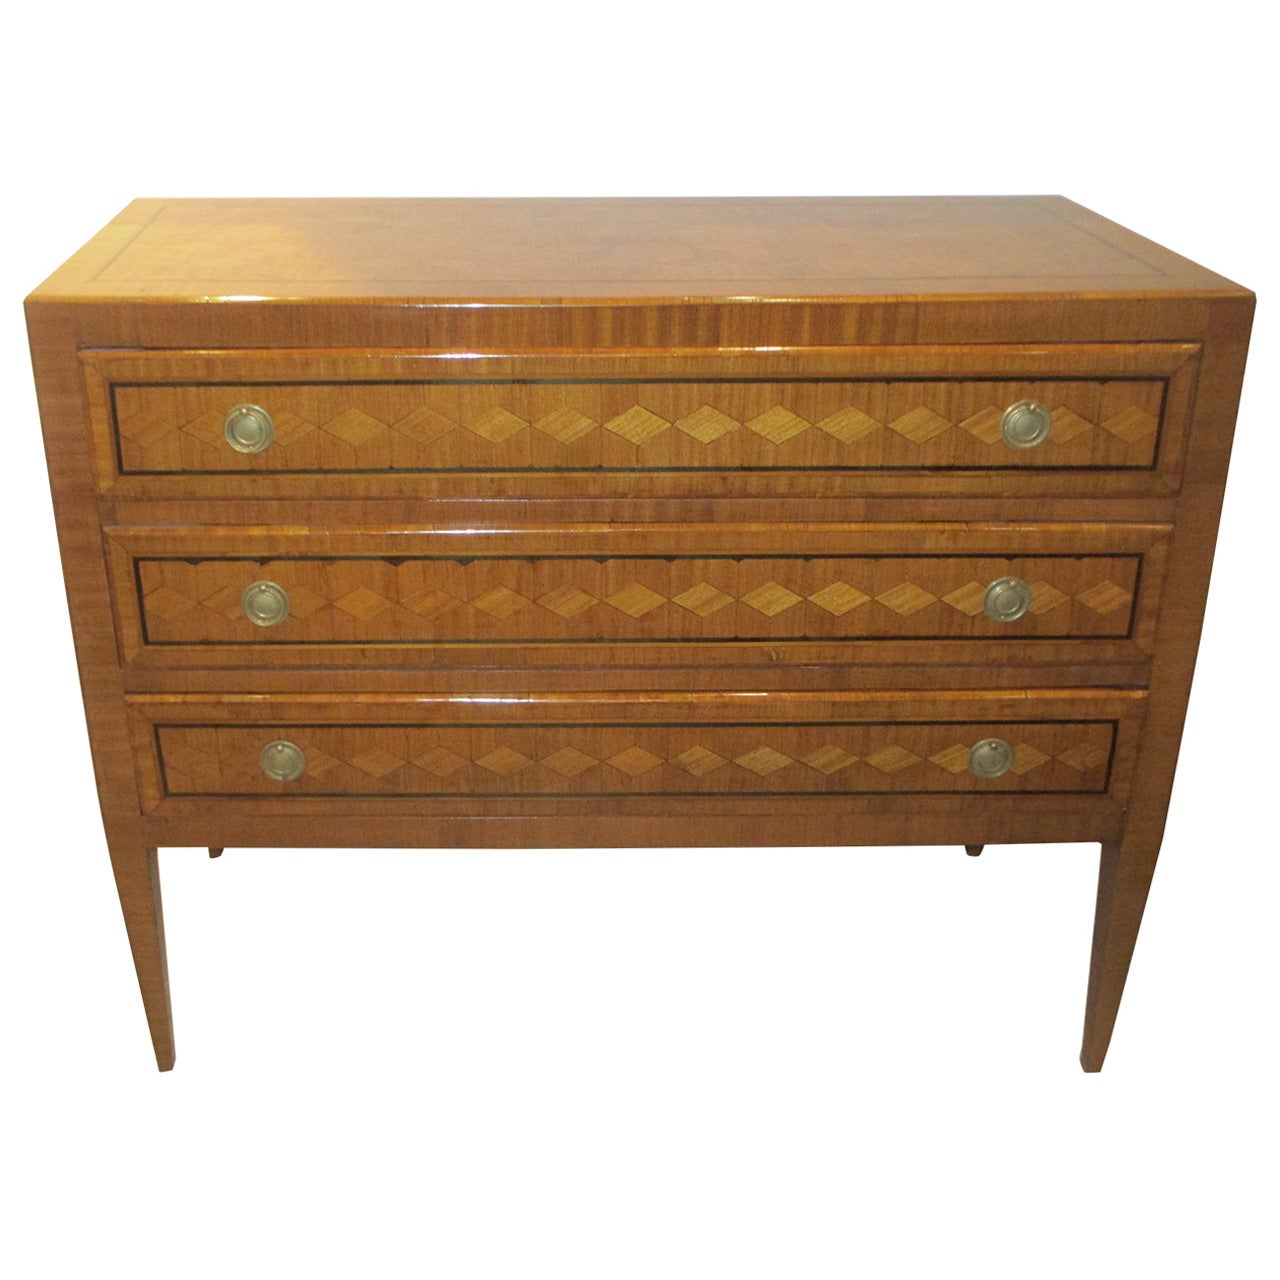 Exquisite Italian Parquetry Commode in the Neoclassical Manner